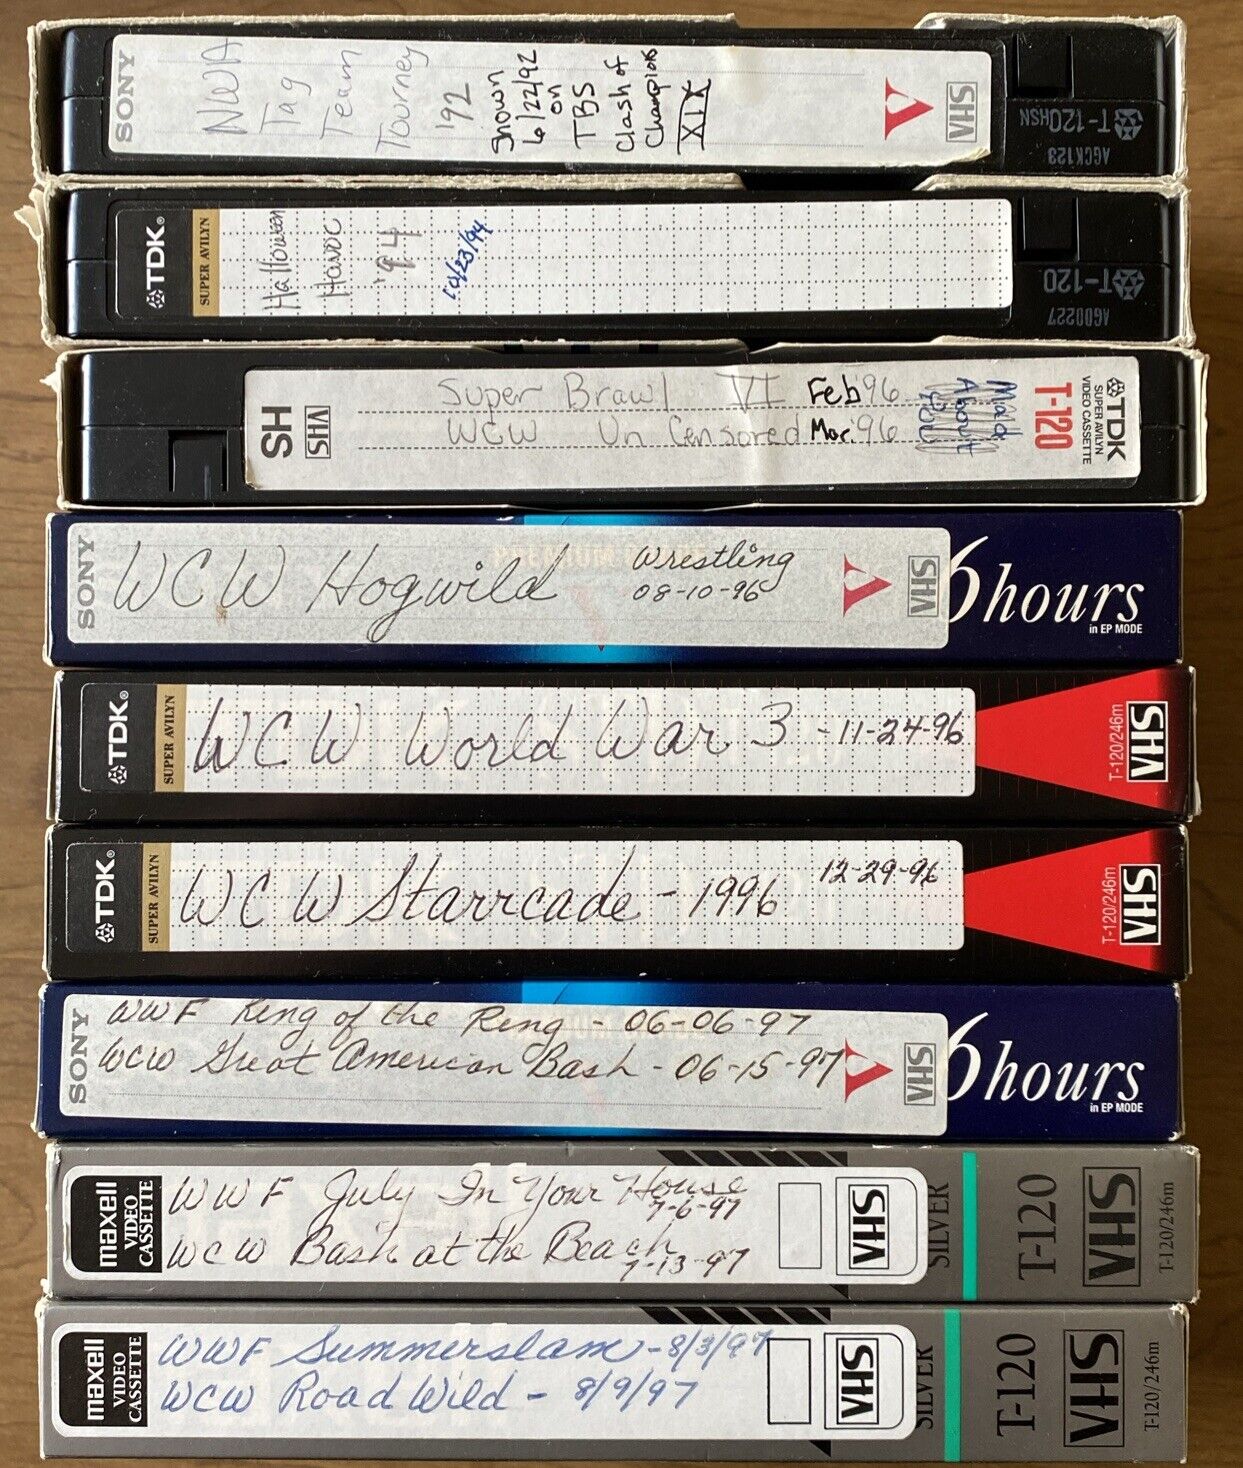 (9) 1992-97 Wrestling VHS Tapes Sold As Blanks